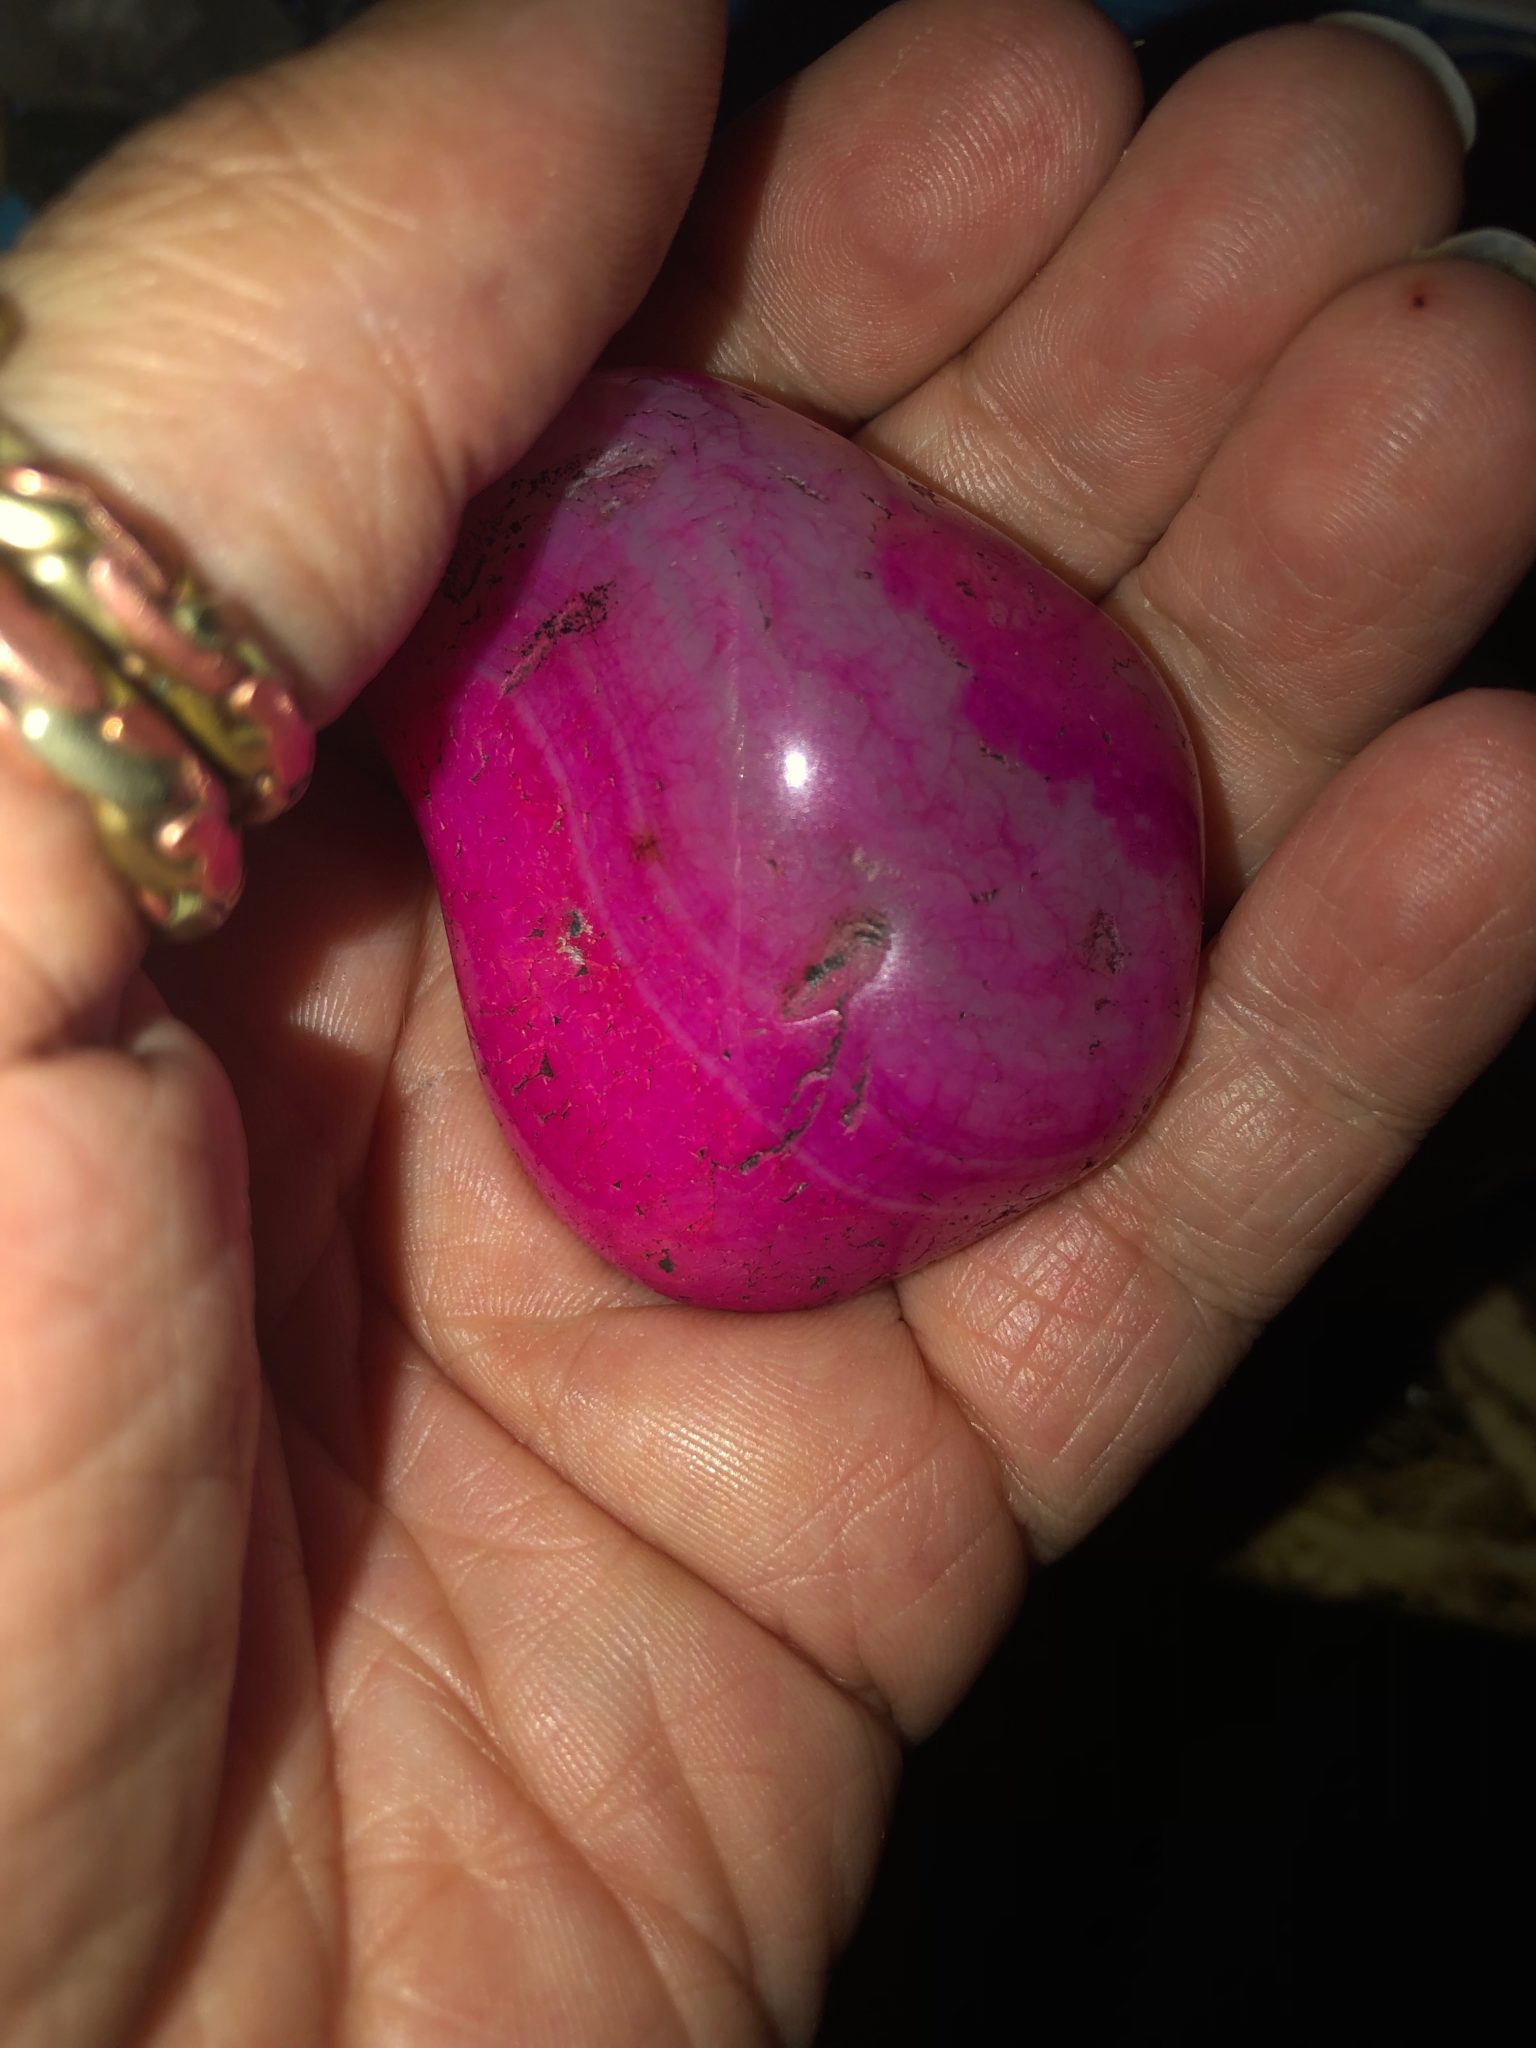 hot pink agate meaning